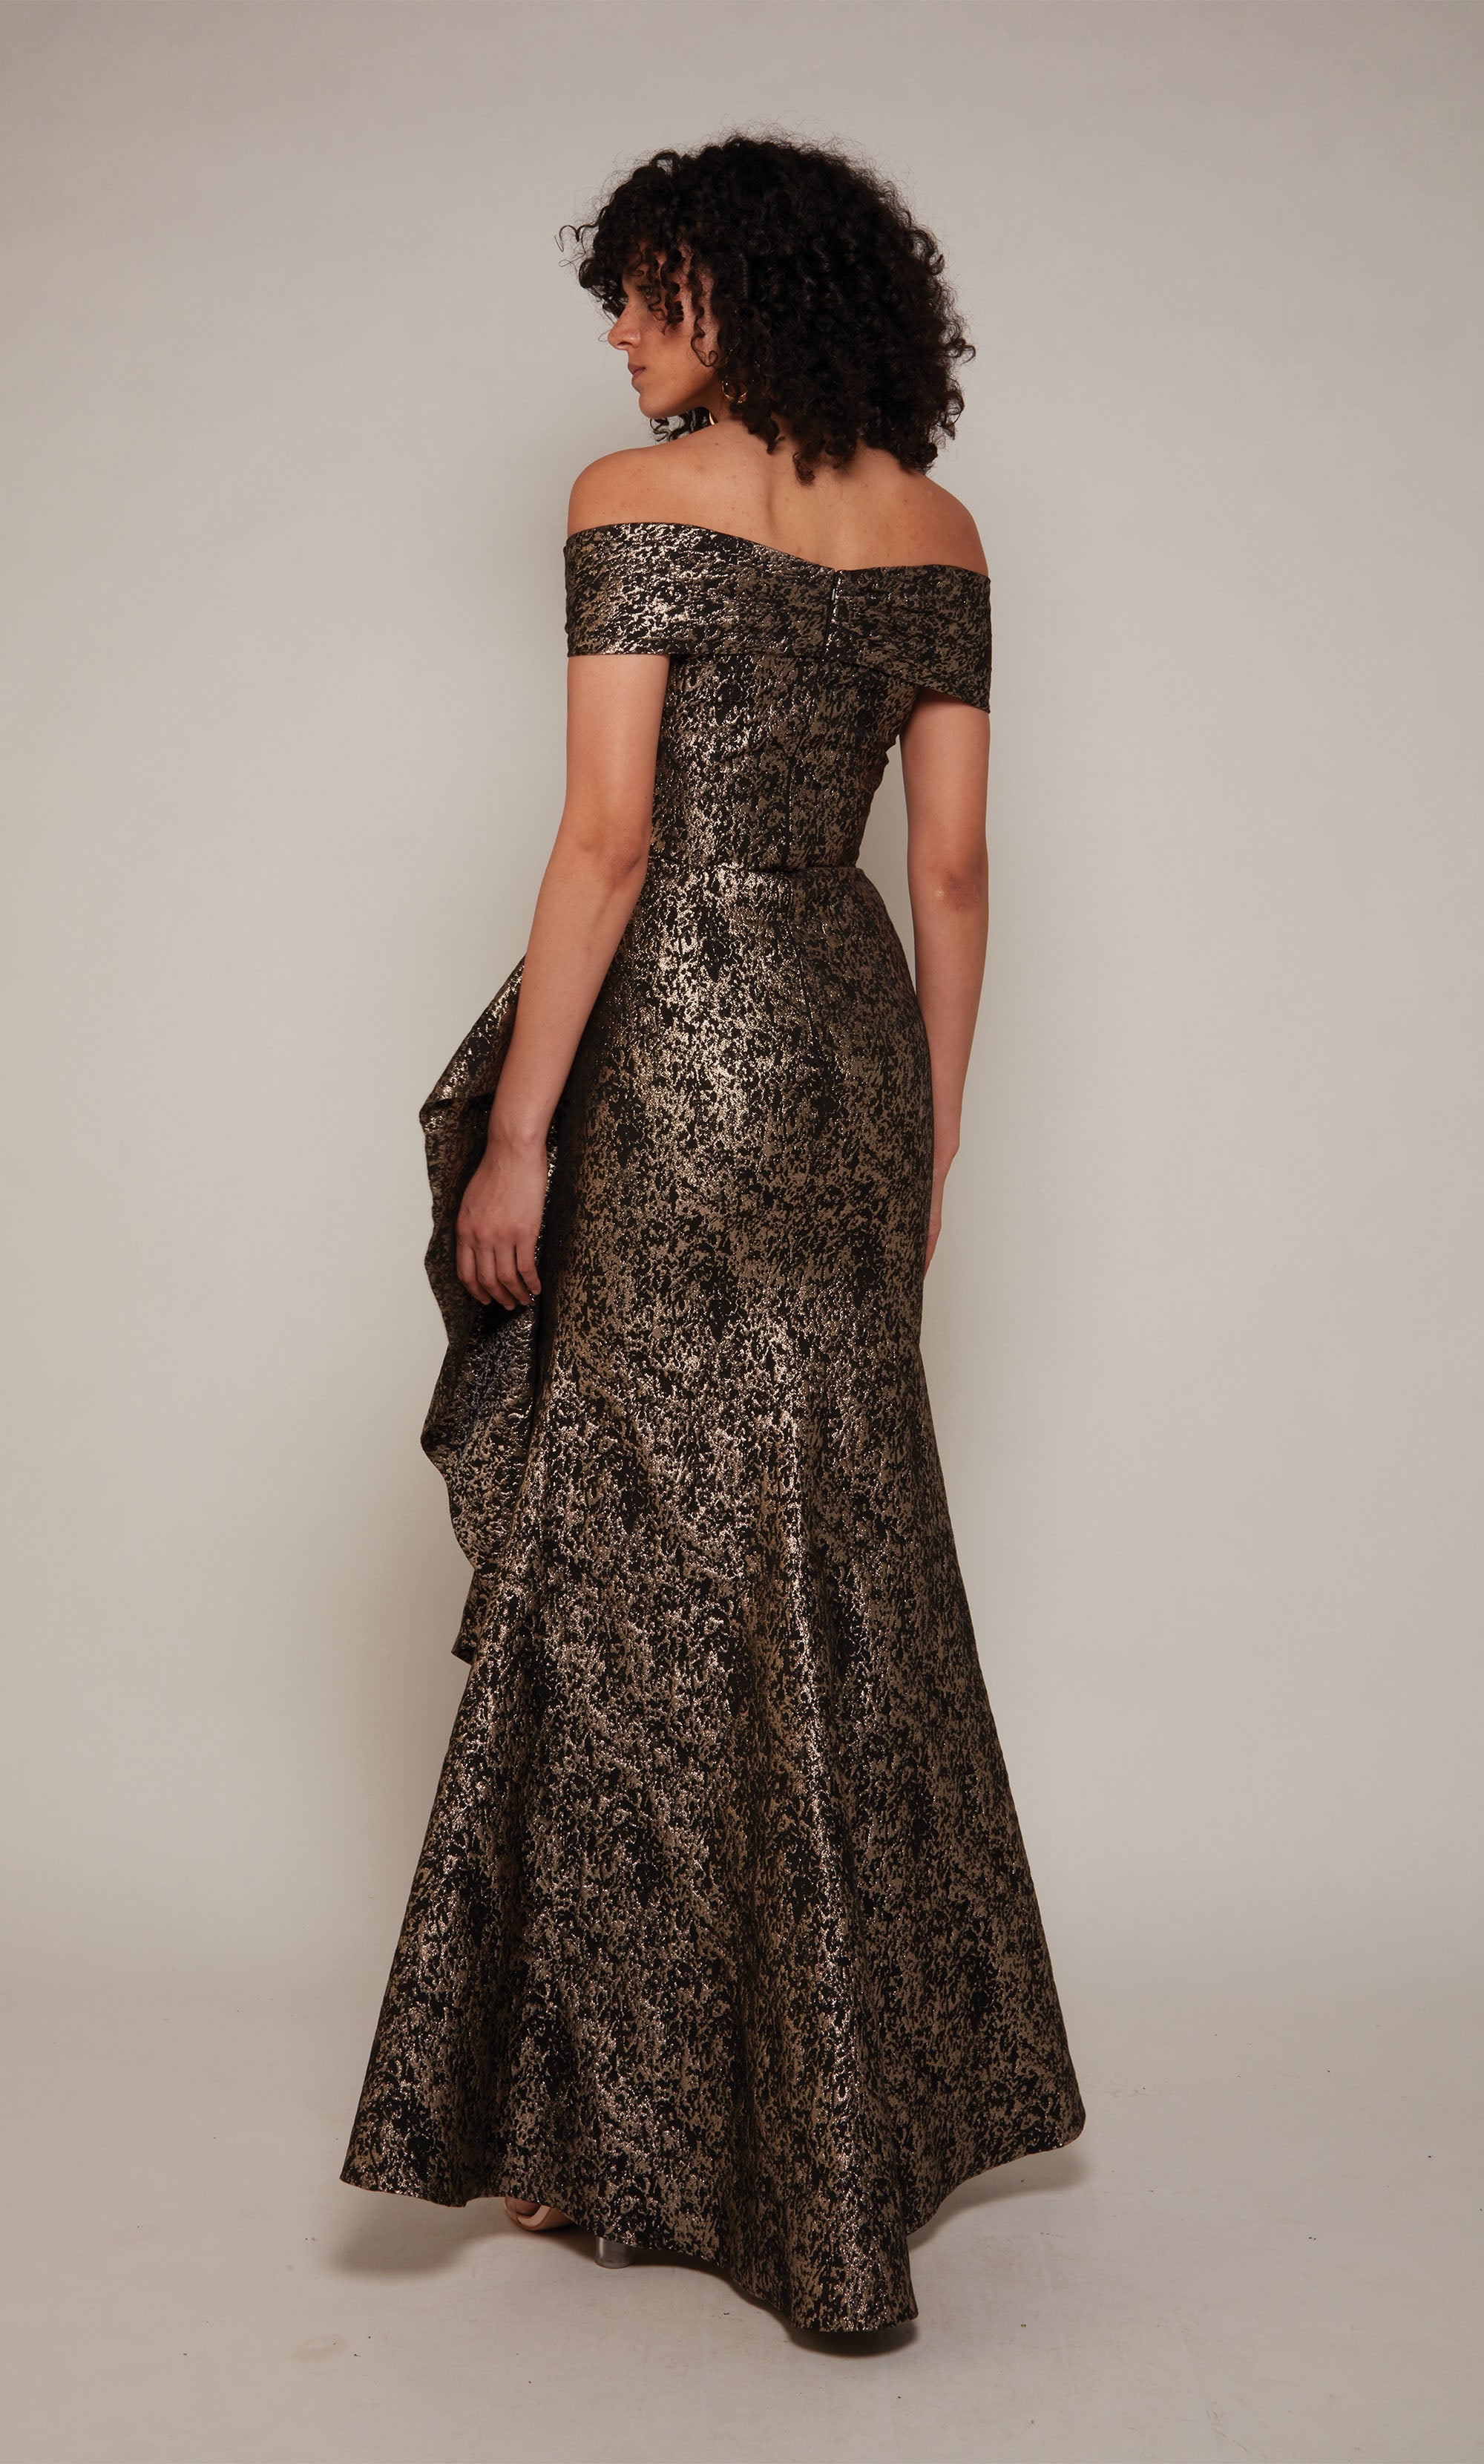 A black and gold Jacquard formal gown with an off the shoulder, twist neckline and a cascading side ruffle.